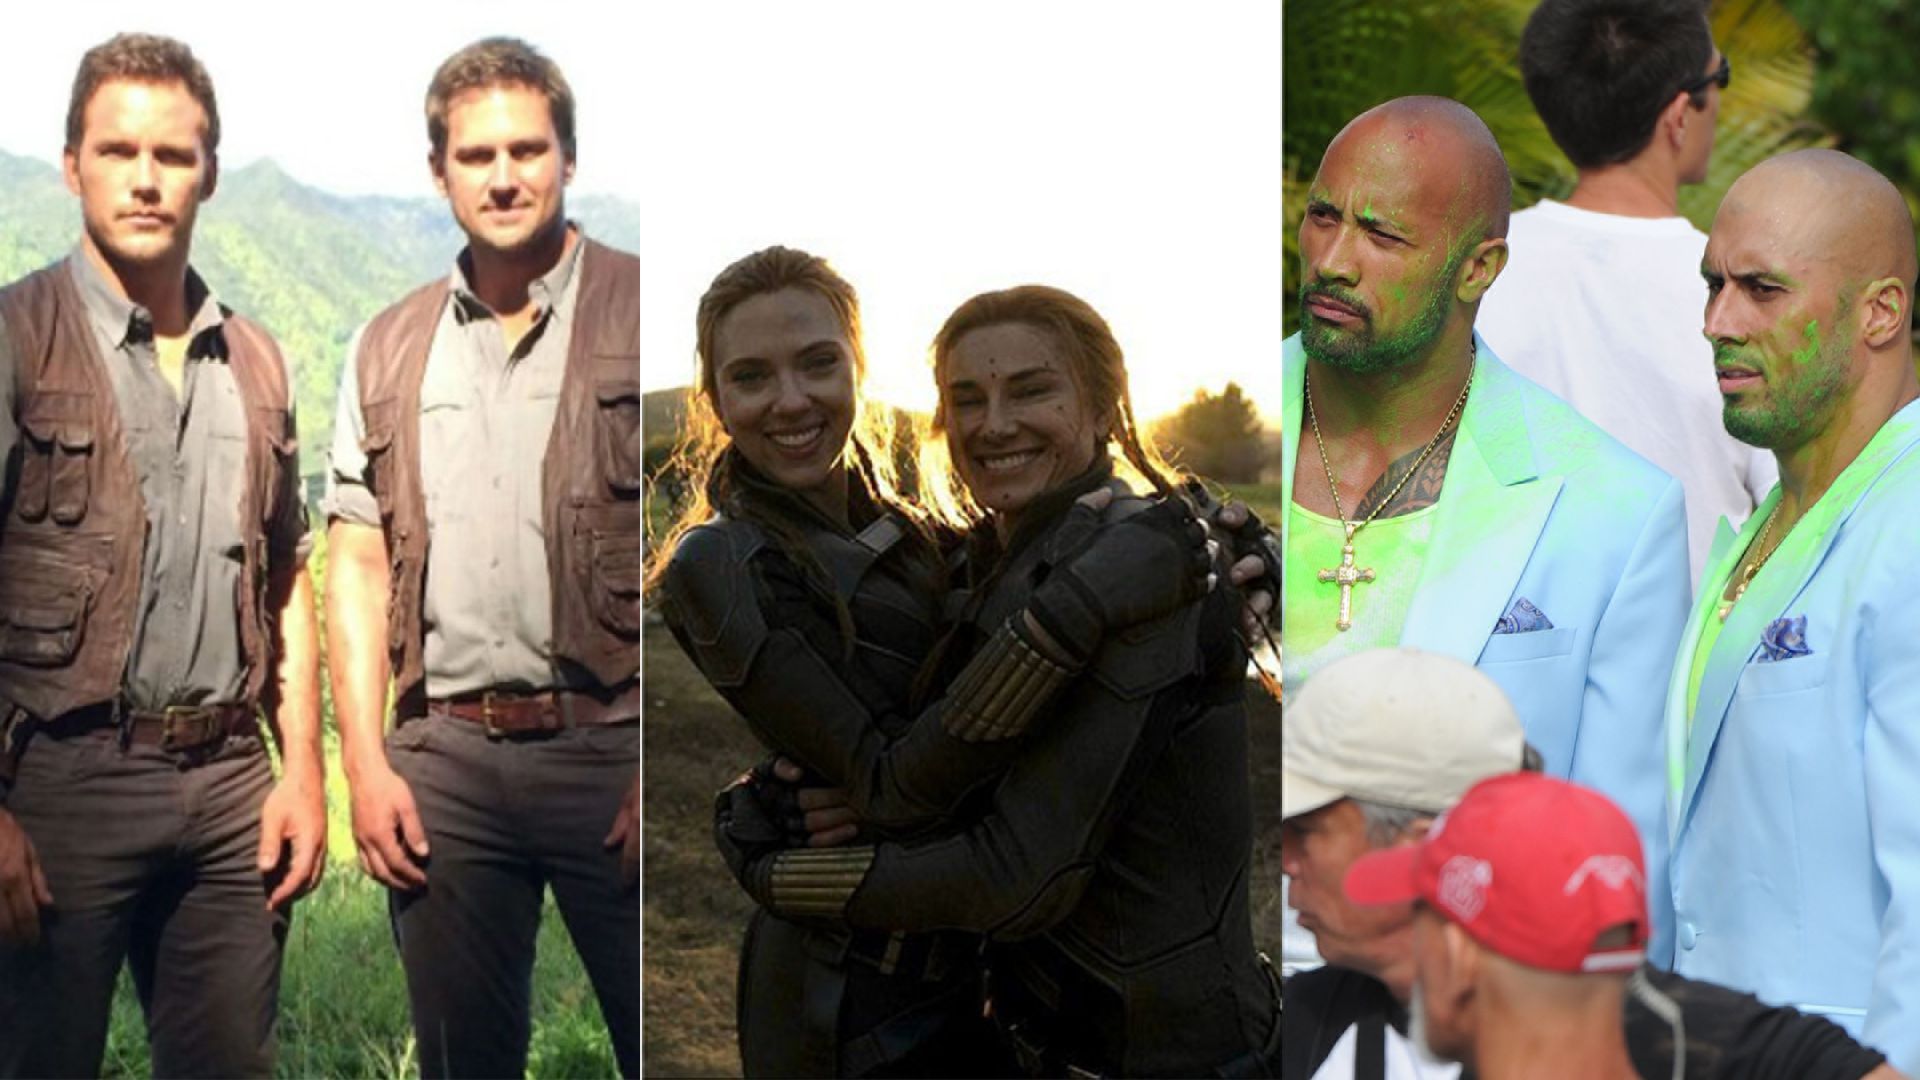 The stars and their stunt doubles: from Scarlett Johansson's Black Widow body double to Chris Pratt's late friend and stunt performer Tony McFarr